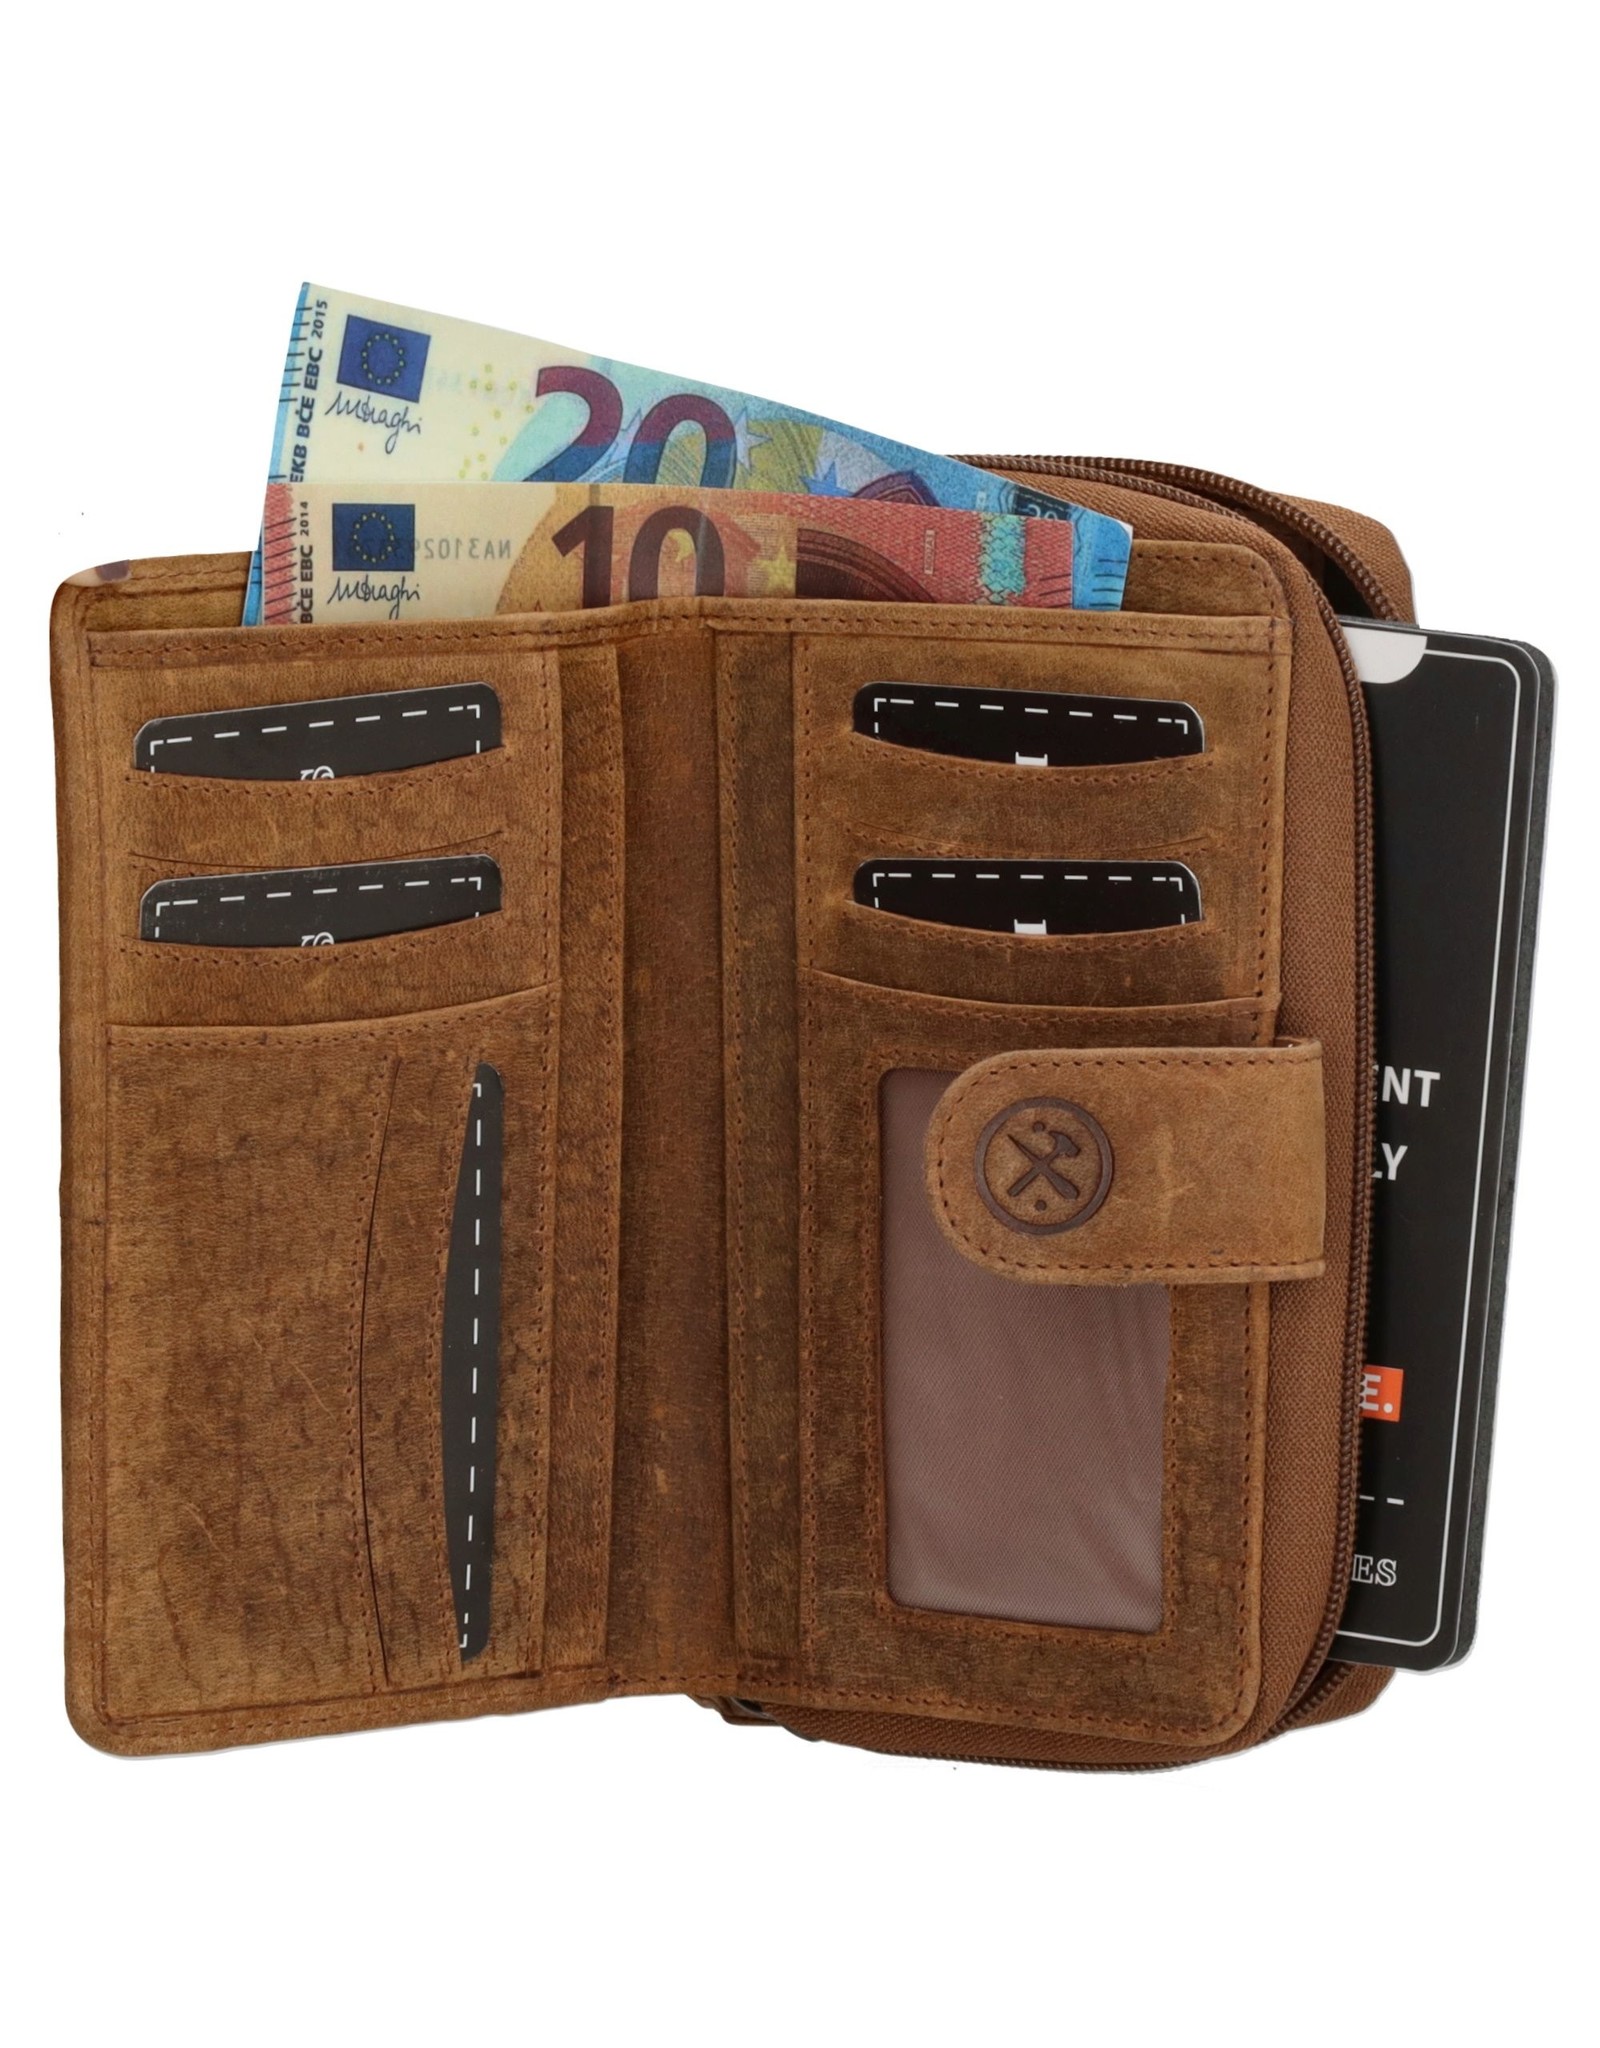 Hide & Stitches Leather Wallets - Leather Purse with Cowhide brown-white